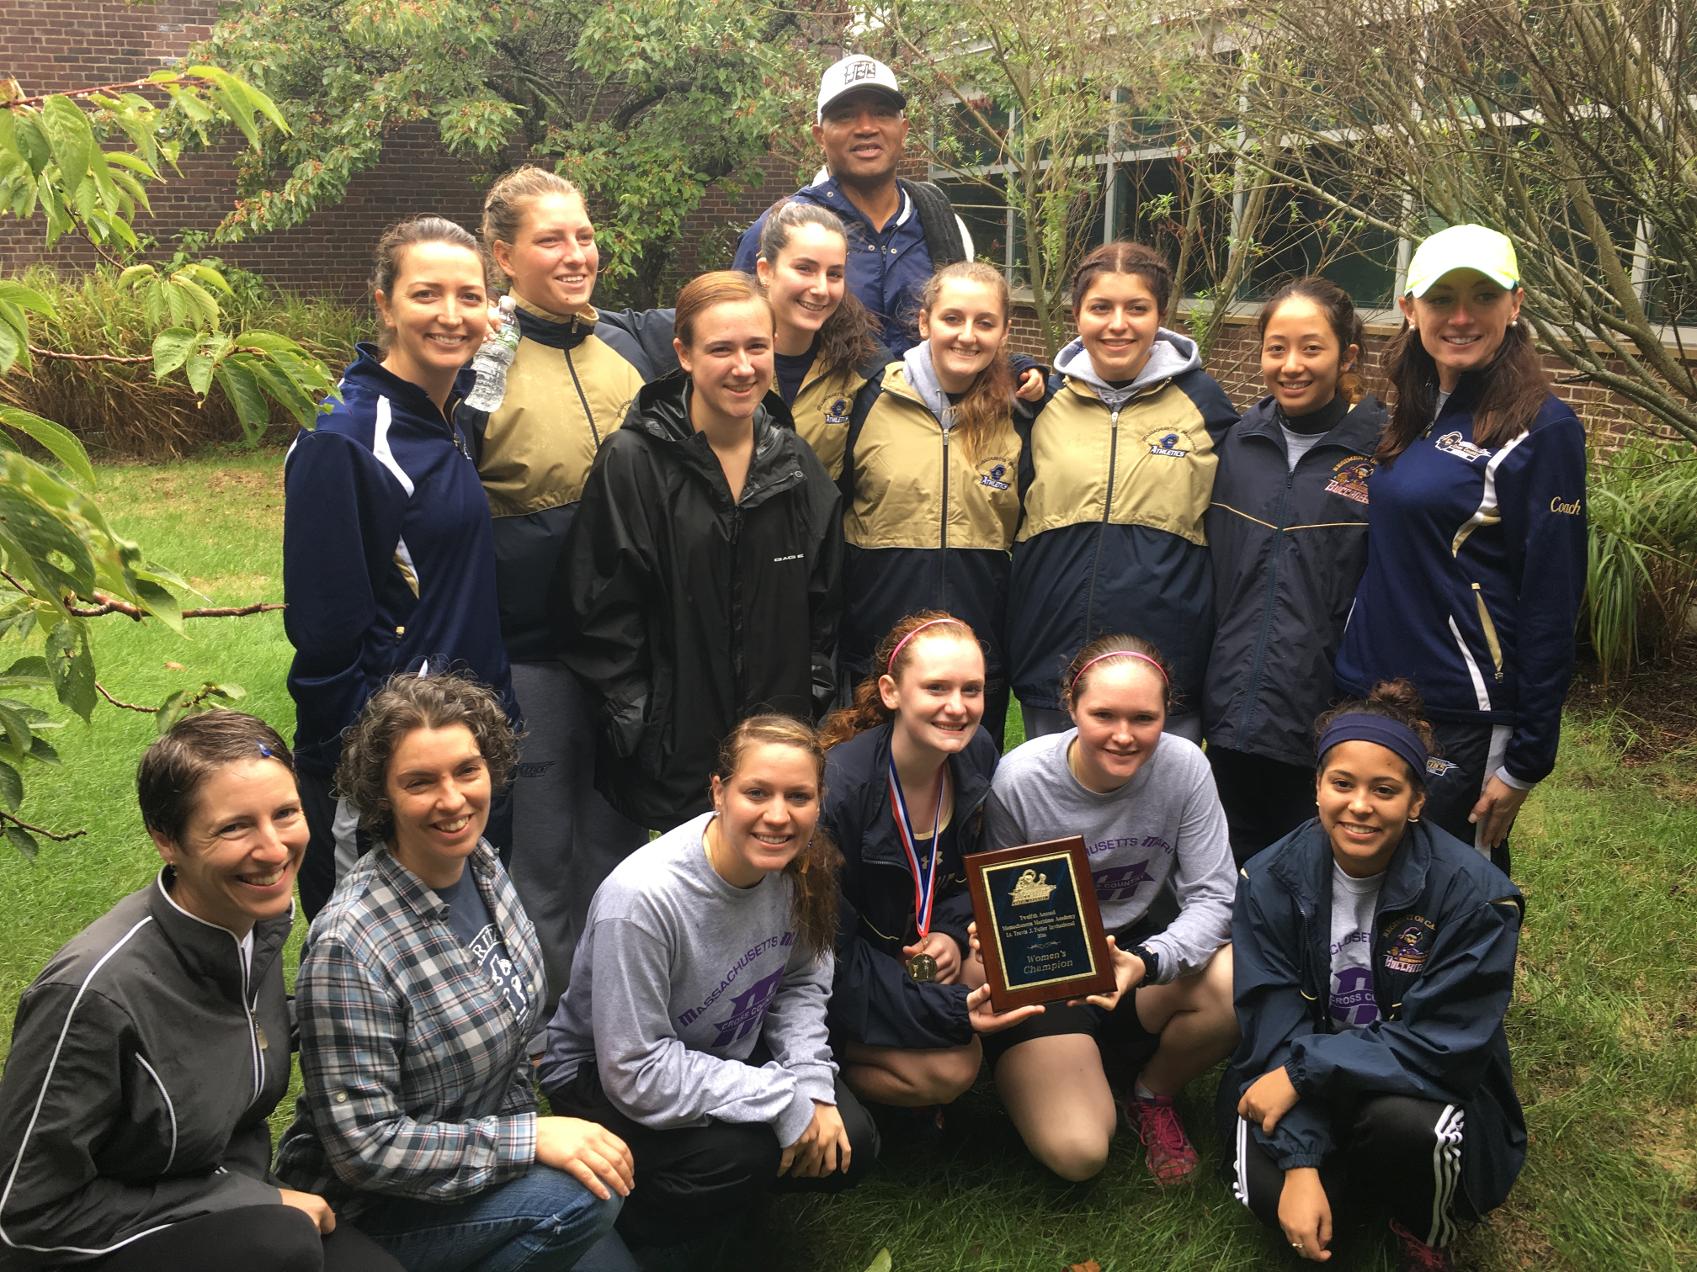 Hamilton Claims Top Honors As Women's Cross Country Captures First Ever Team Title At 12th Annual Travis Fuller Invitational